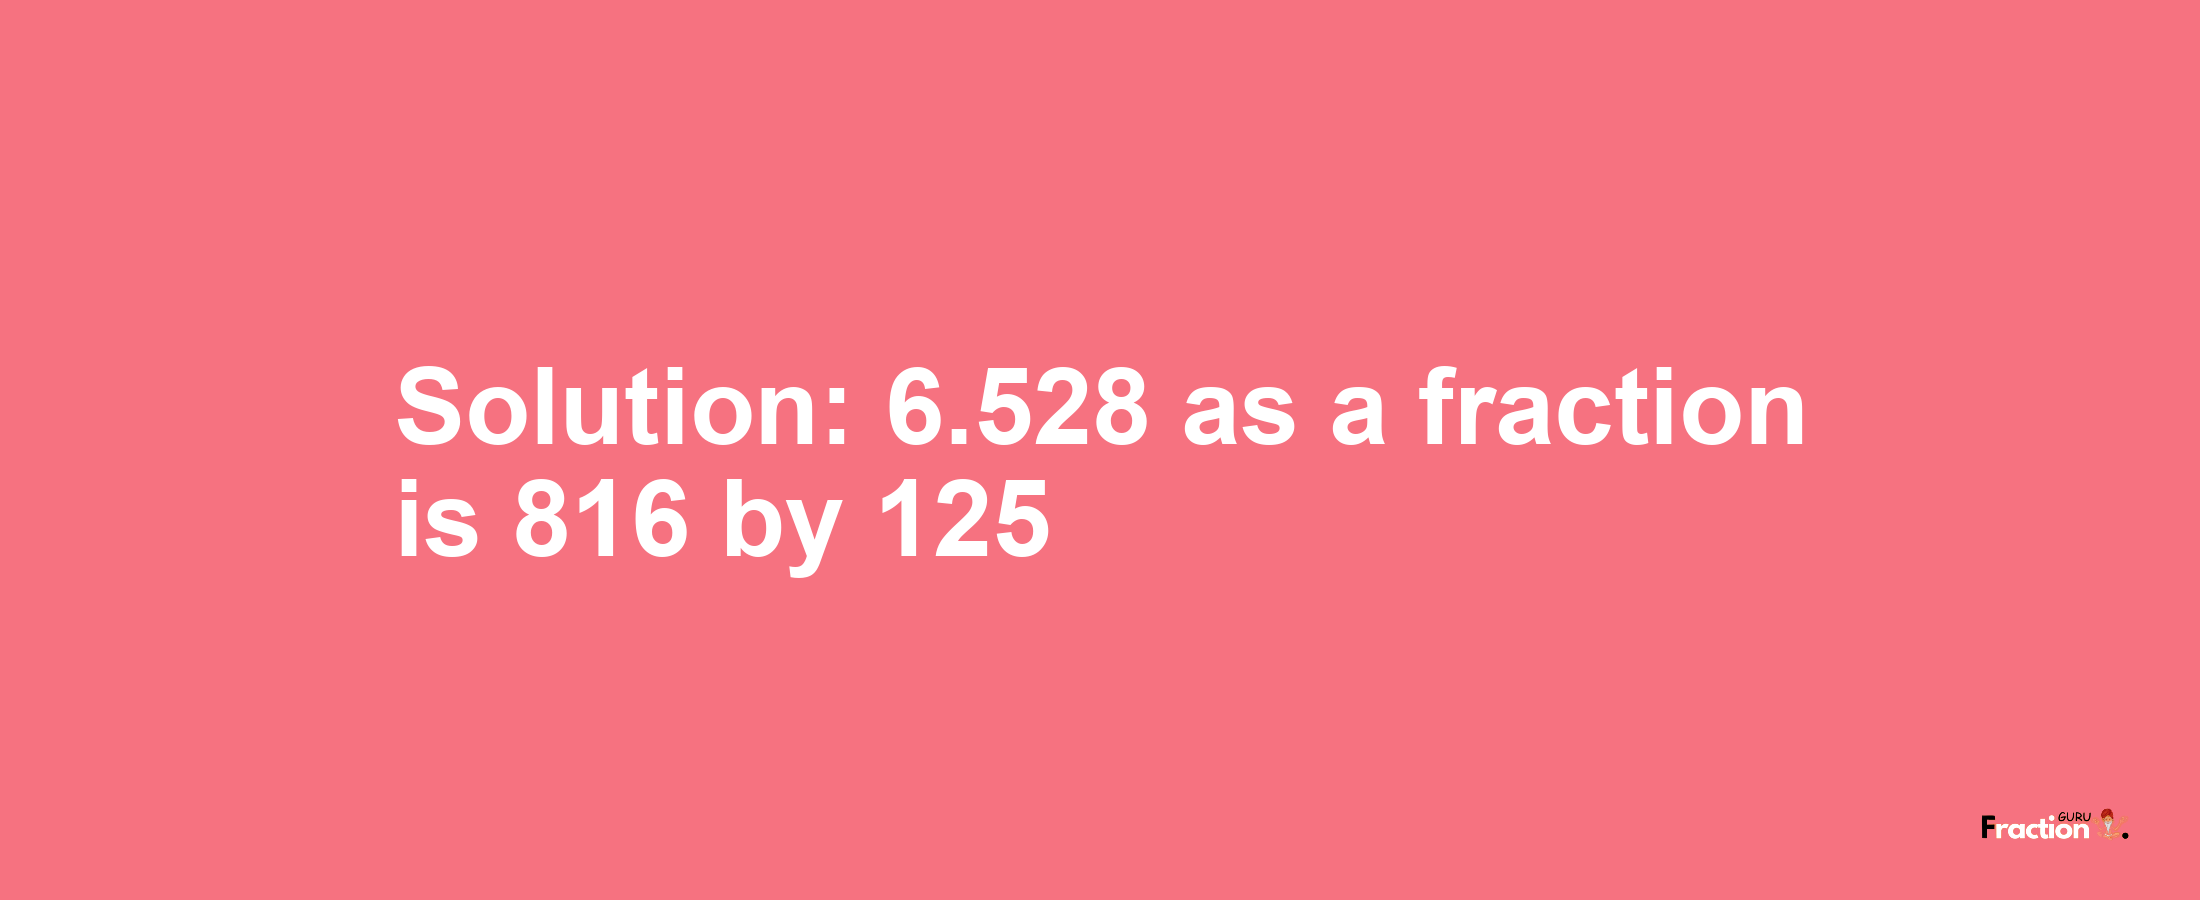 Solution:6.528 as a fraction is 816/125